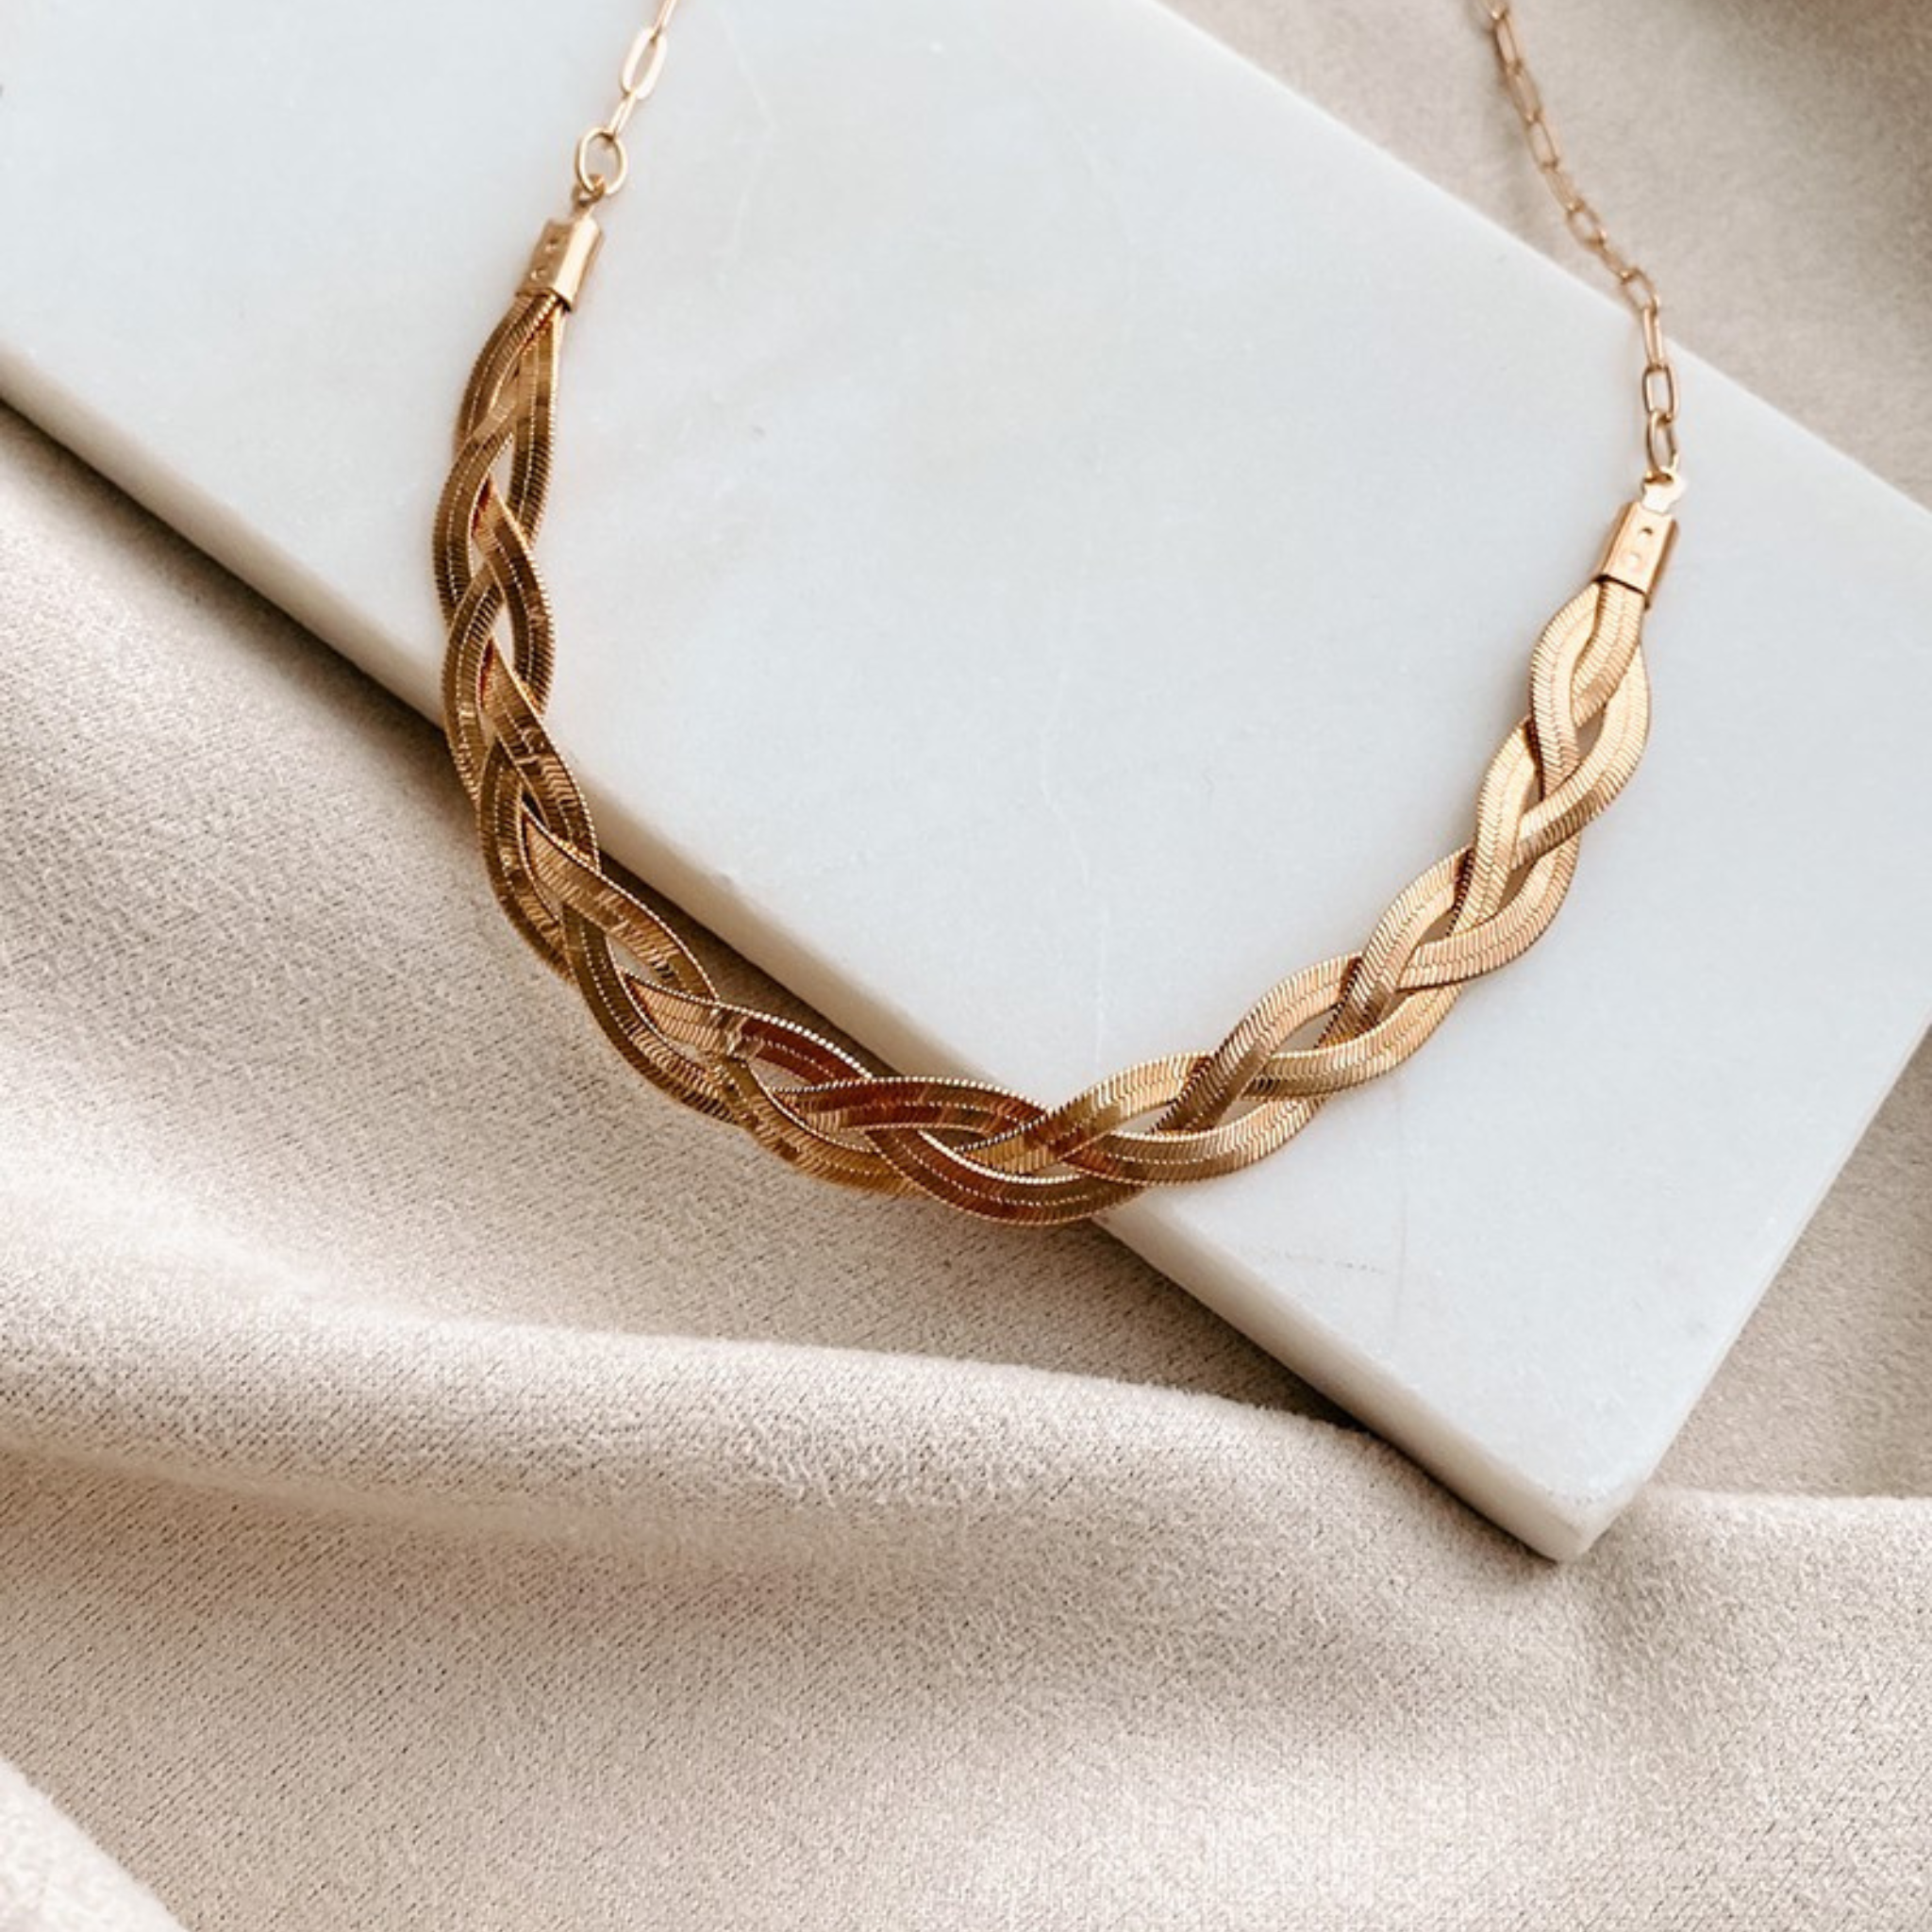 Tricolor Gold Braided Herringbone Chain Necklace / 925 Sterling Silver /  14k Yellow & Rose Gold Plated / Twisted Flat Snake /16 18 20 Inches - Etsy